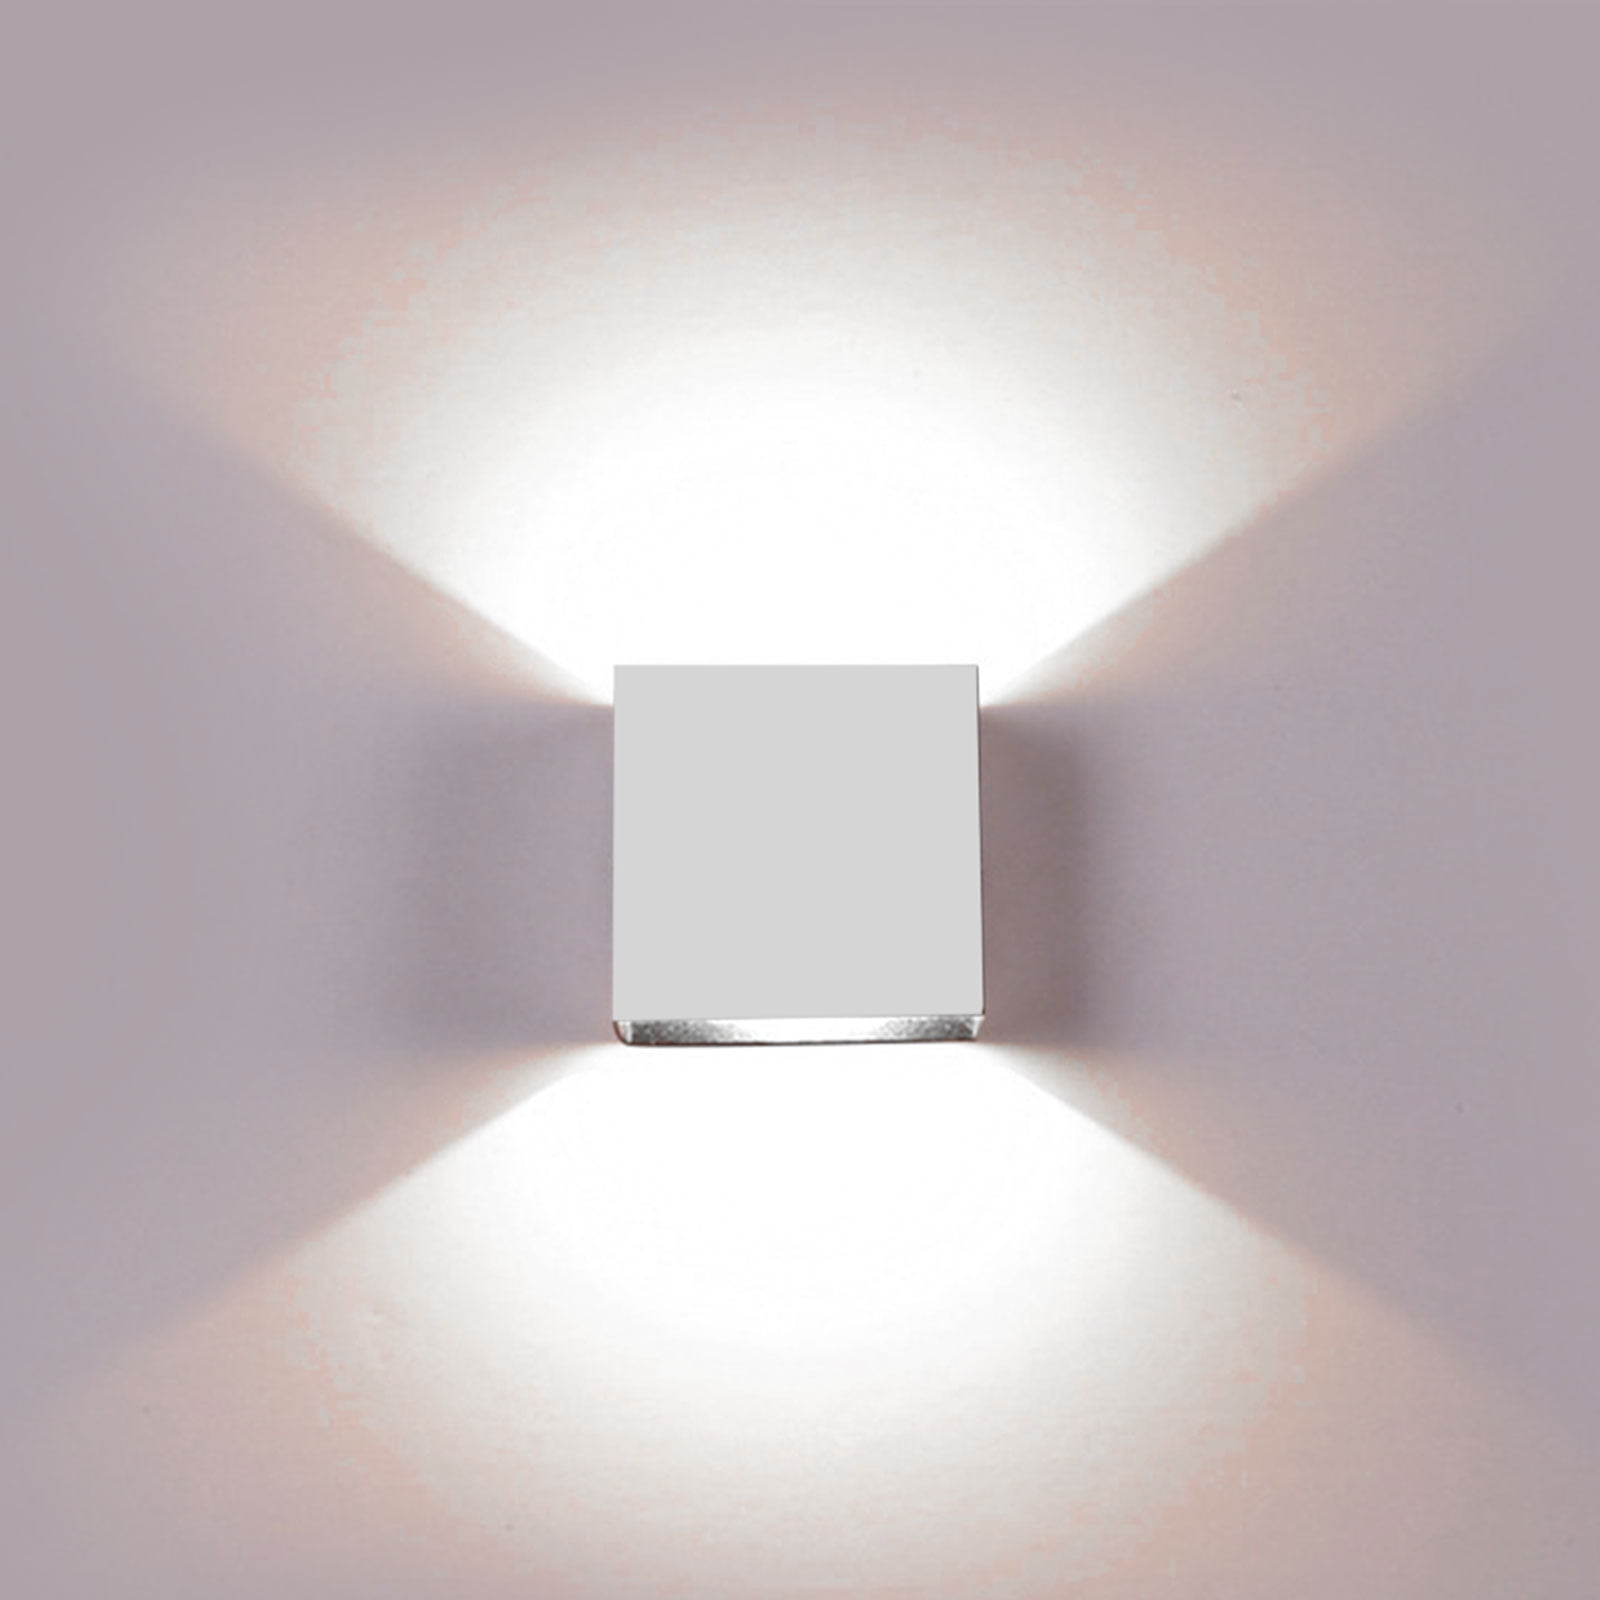 LED Wall Light Up Down Cube Indoor Bedside Outdoor Sconce Lighting Lamp Fixture 